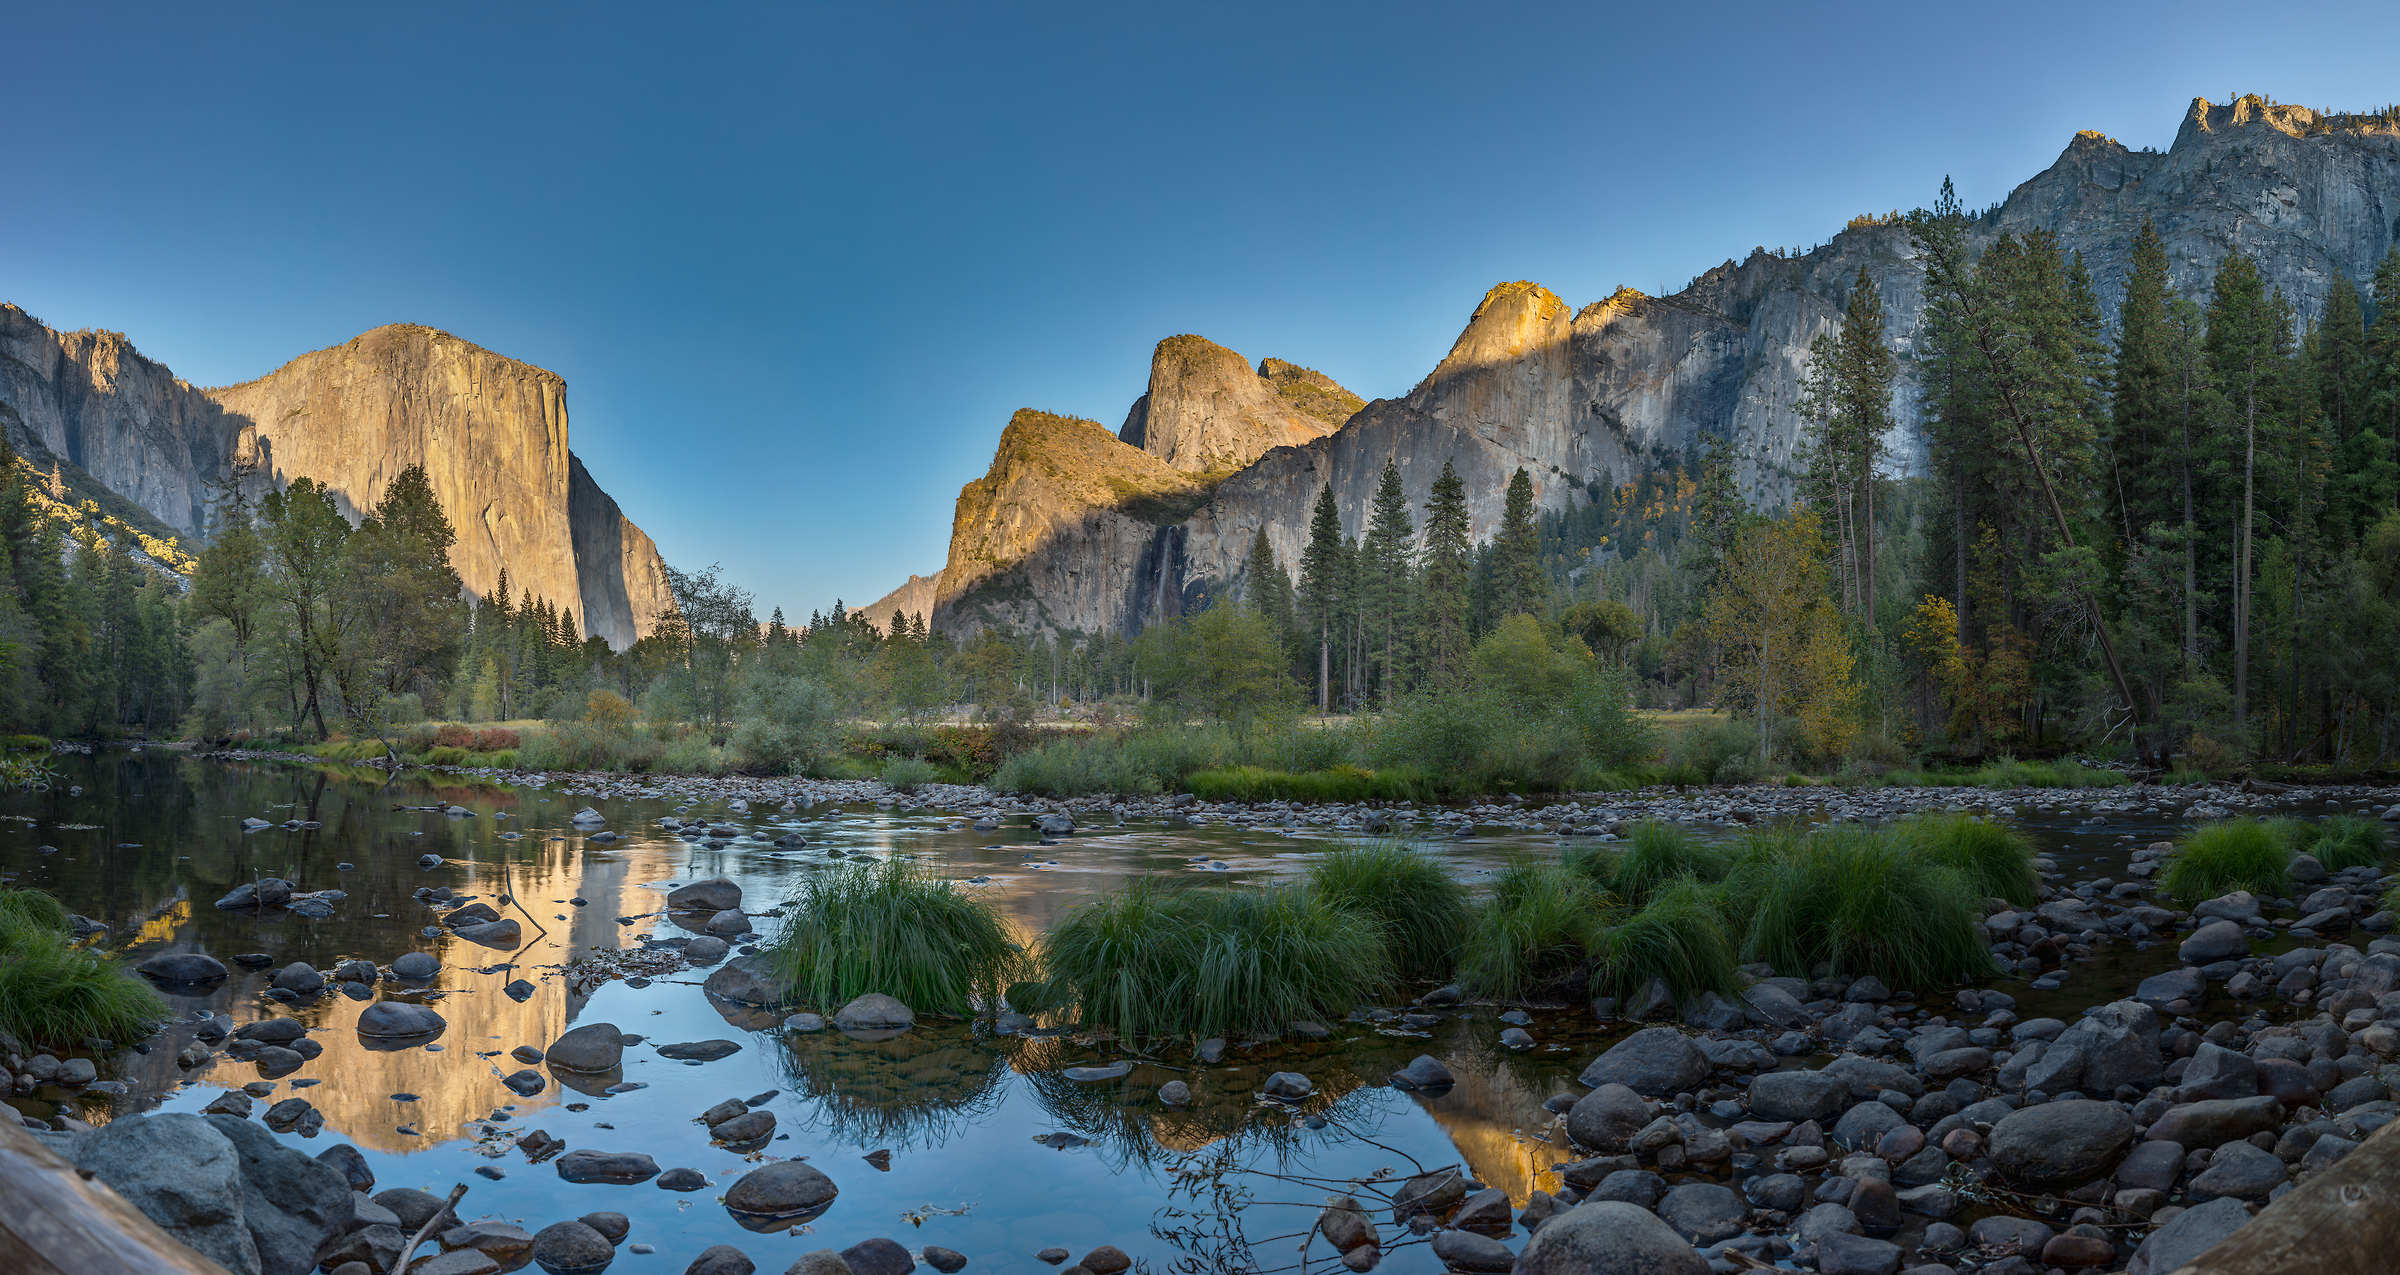 1,545 megapixels! A very high resolution, large-format VAST photo print of a river, trees, valley, and mountains; landscape photograph created by John Freeman in Valley View, Yosemite National Park, California